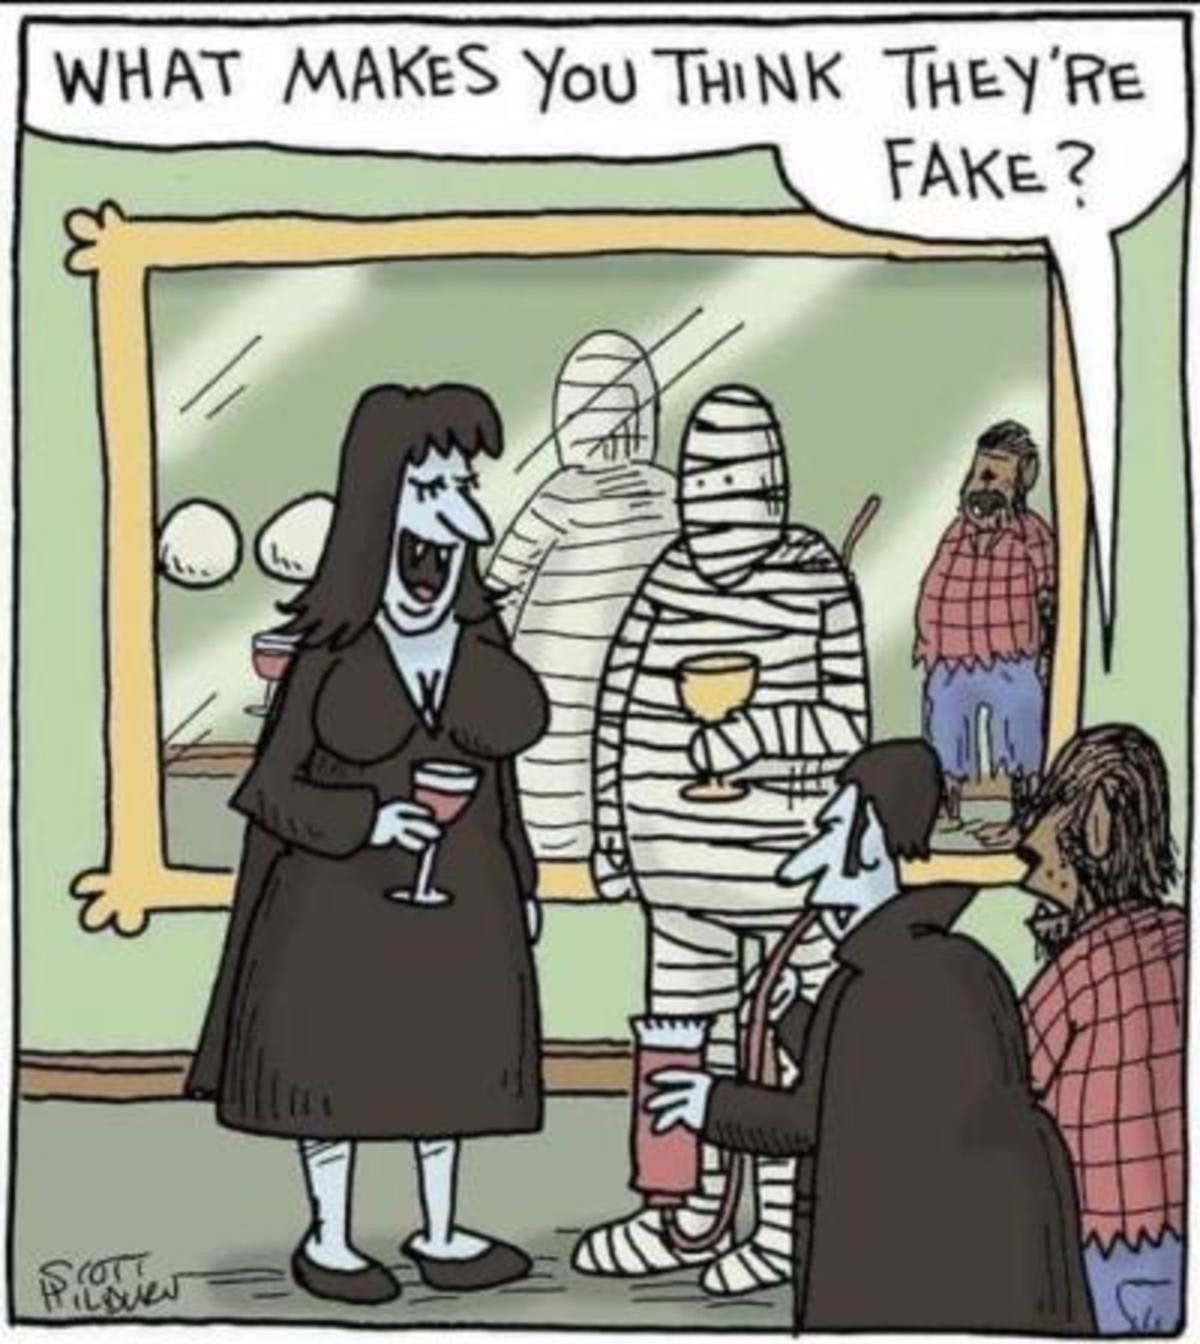 happy halloween funny meme - What Makes You Think They'Re Fake? Hilm